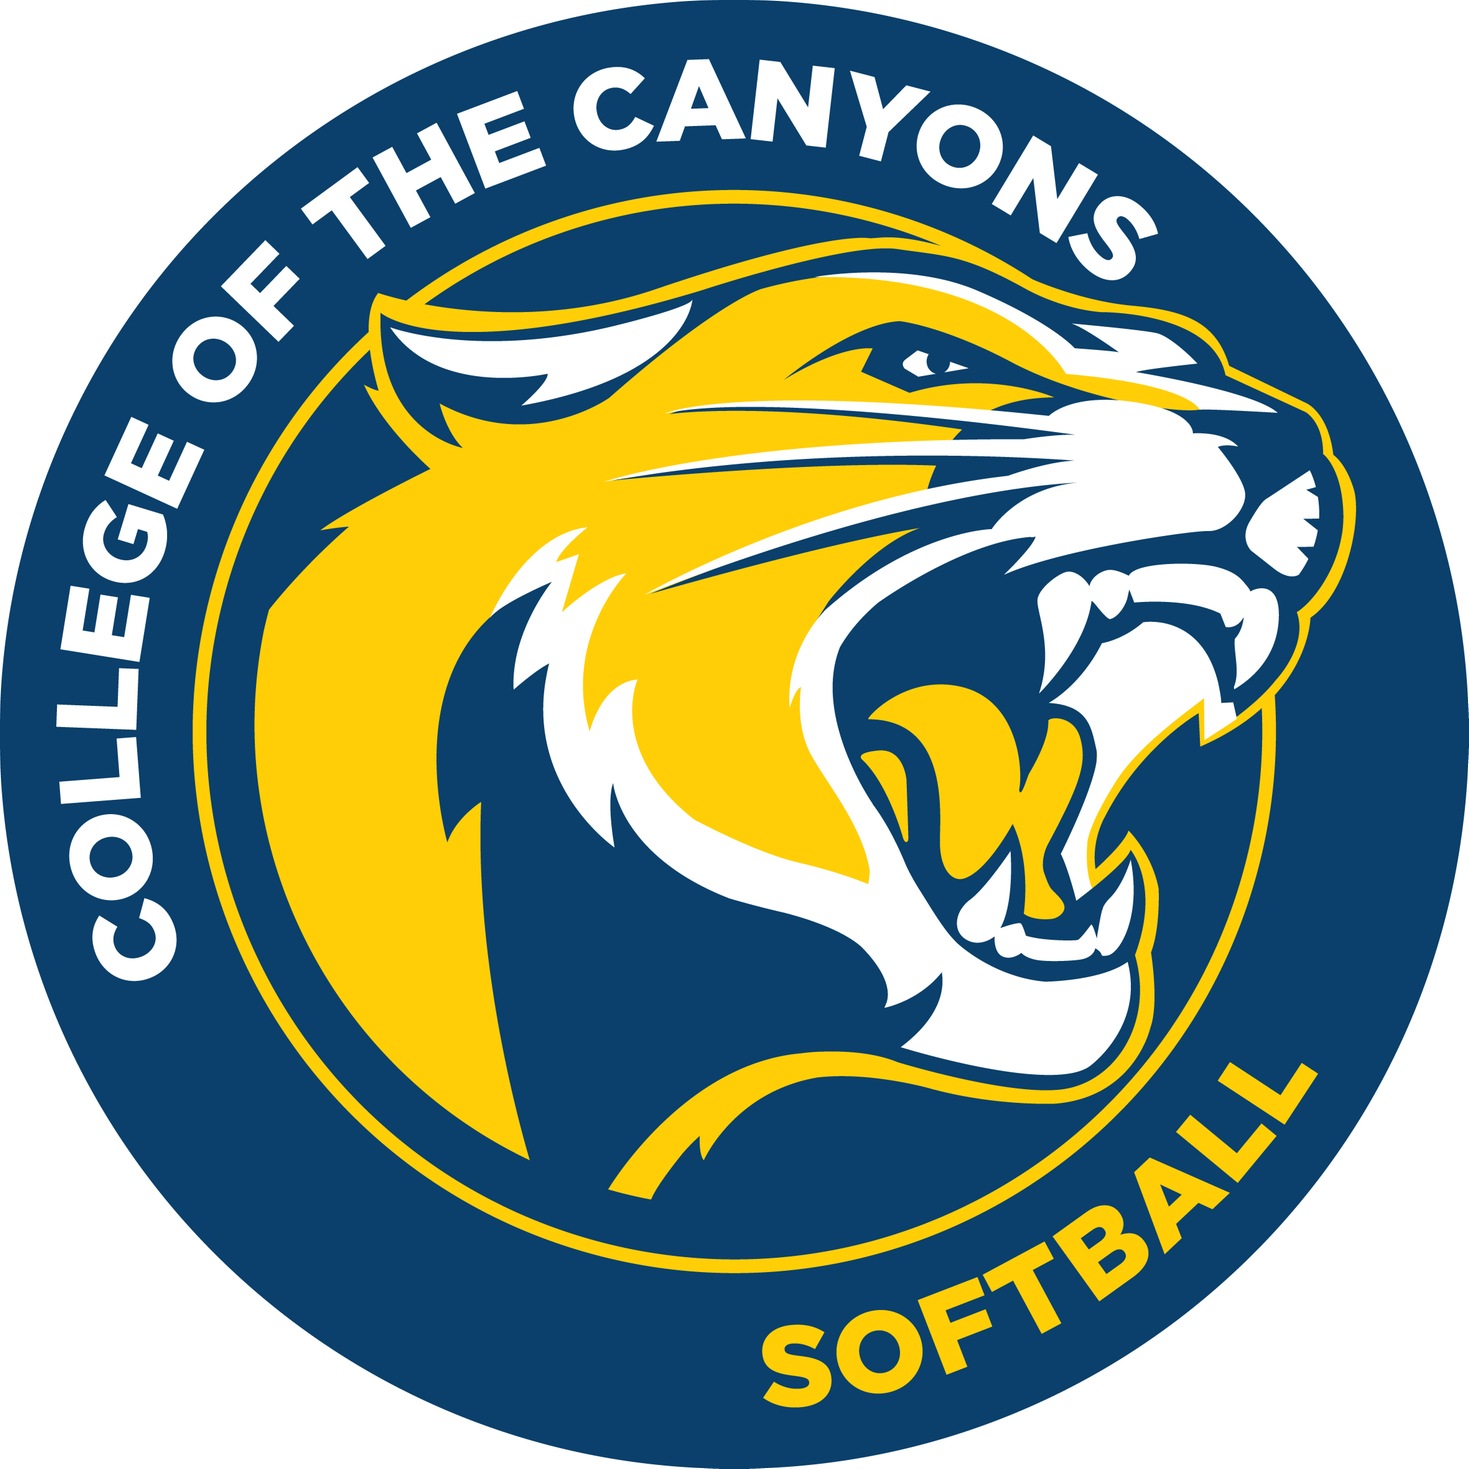 College of the Canyons softball logo.